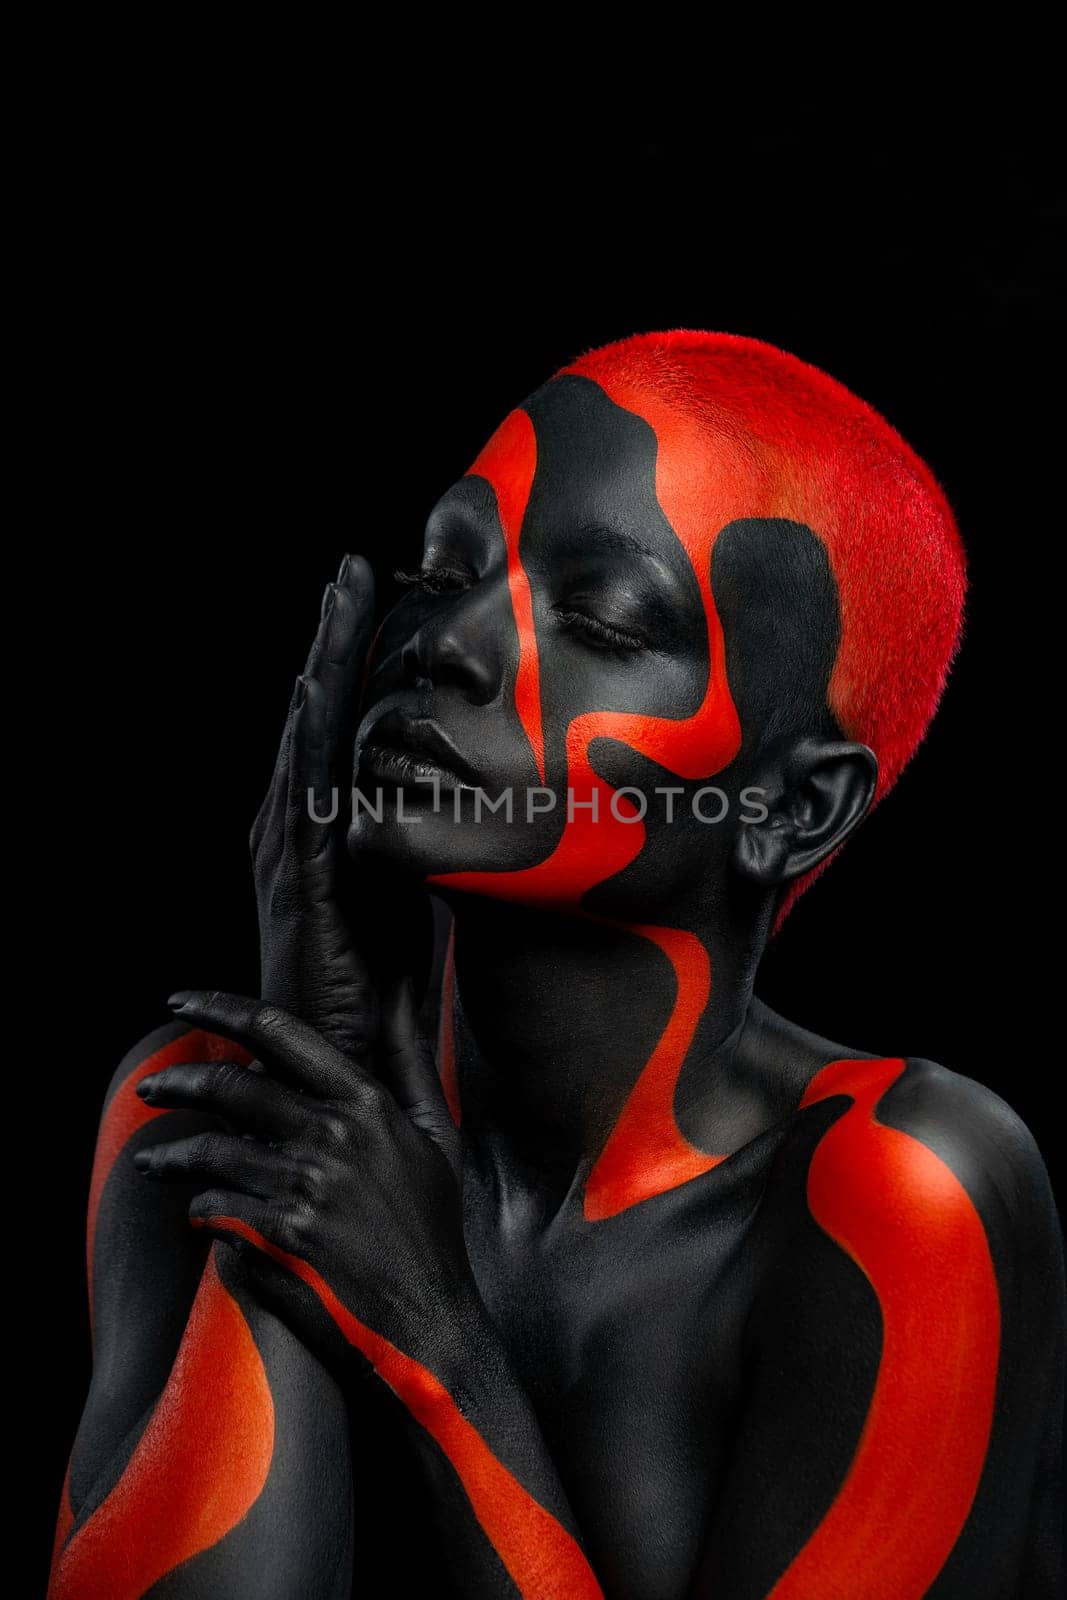 The Art Face. How To Make A Mixtape Cover Design - Download High Resolution picture with black and red body paint on african woman for your music song. Create album template with creative Image. by MikeOrlov